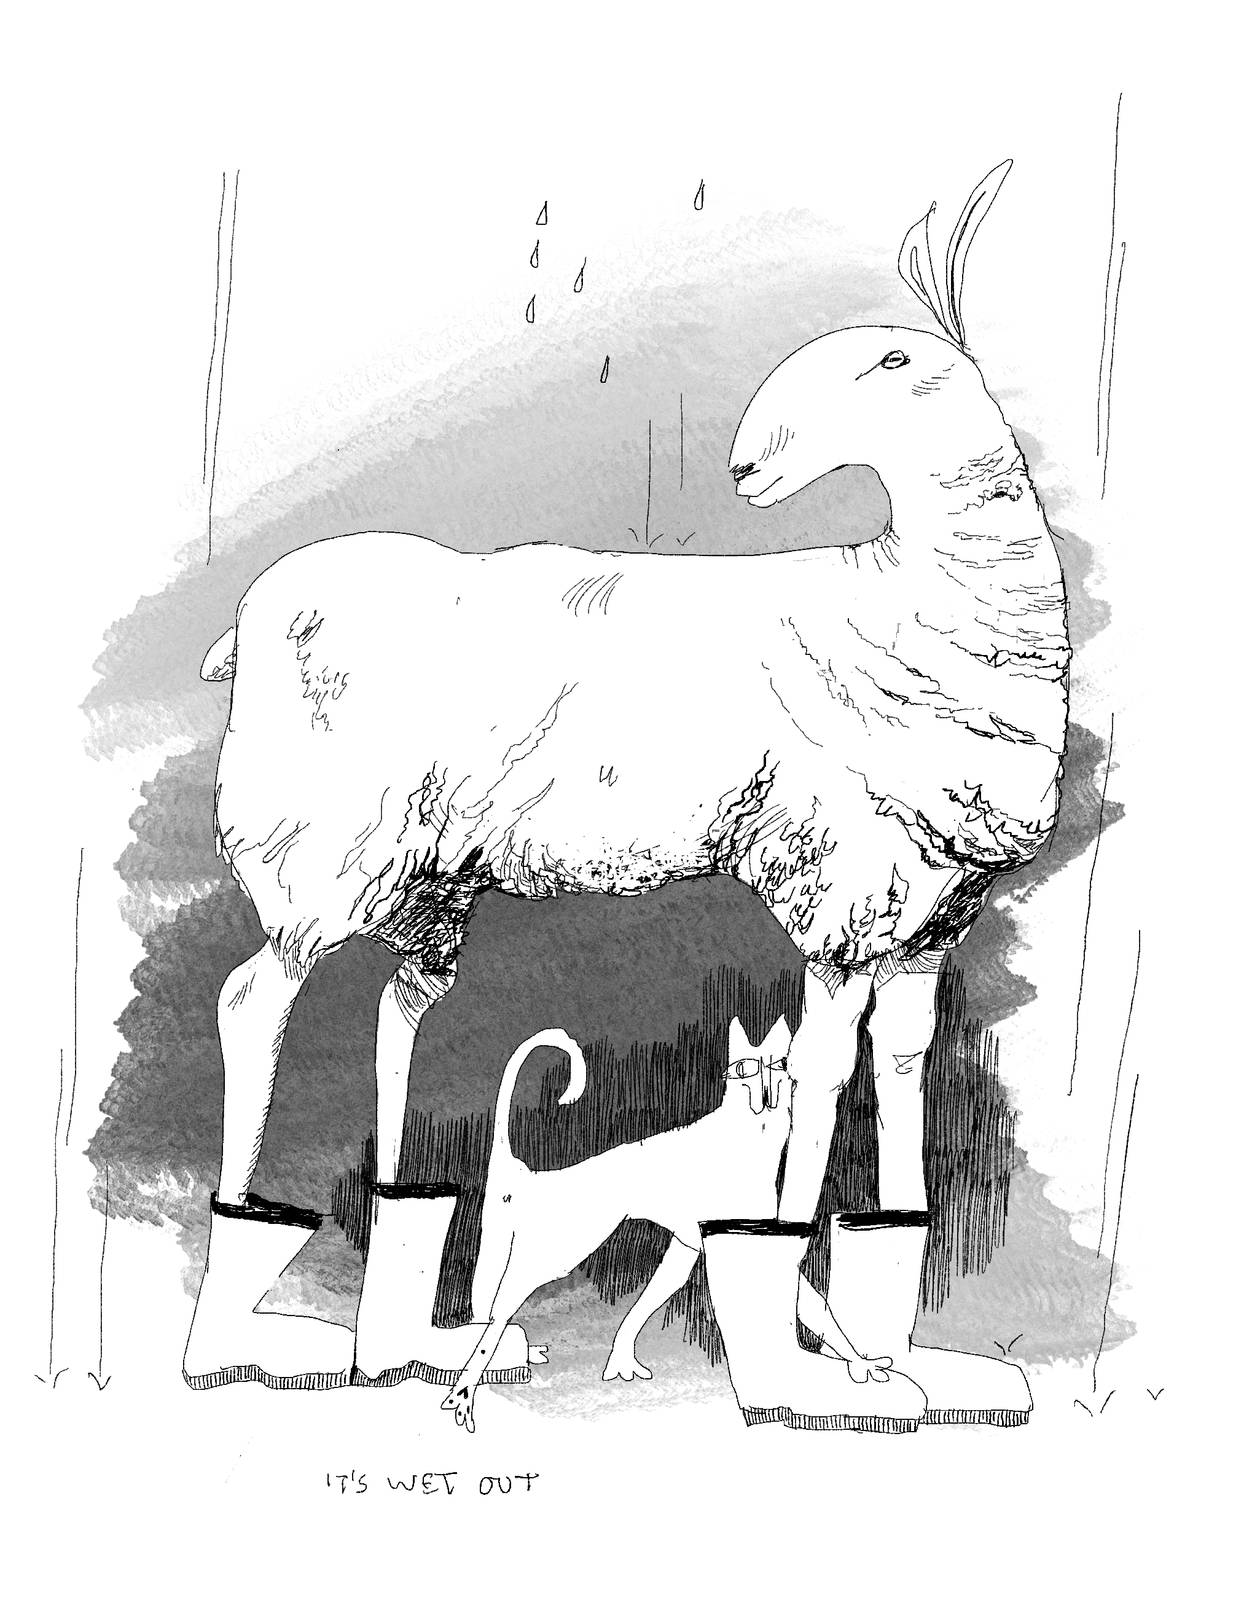 Line drawing of a border leichester sheep, seen from the side. It is wearing rubber boots, and between its legs a cat snakes around. It is raining